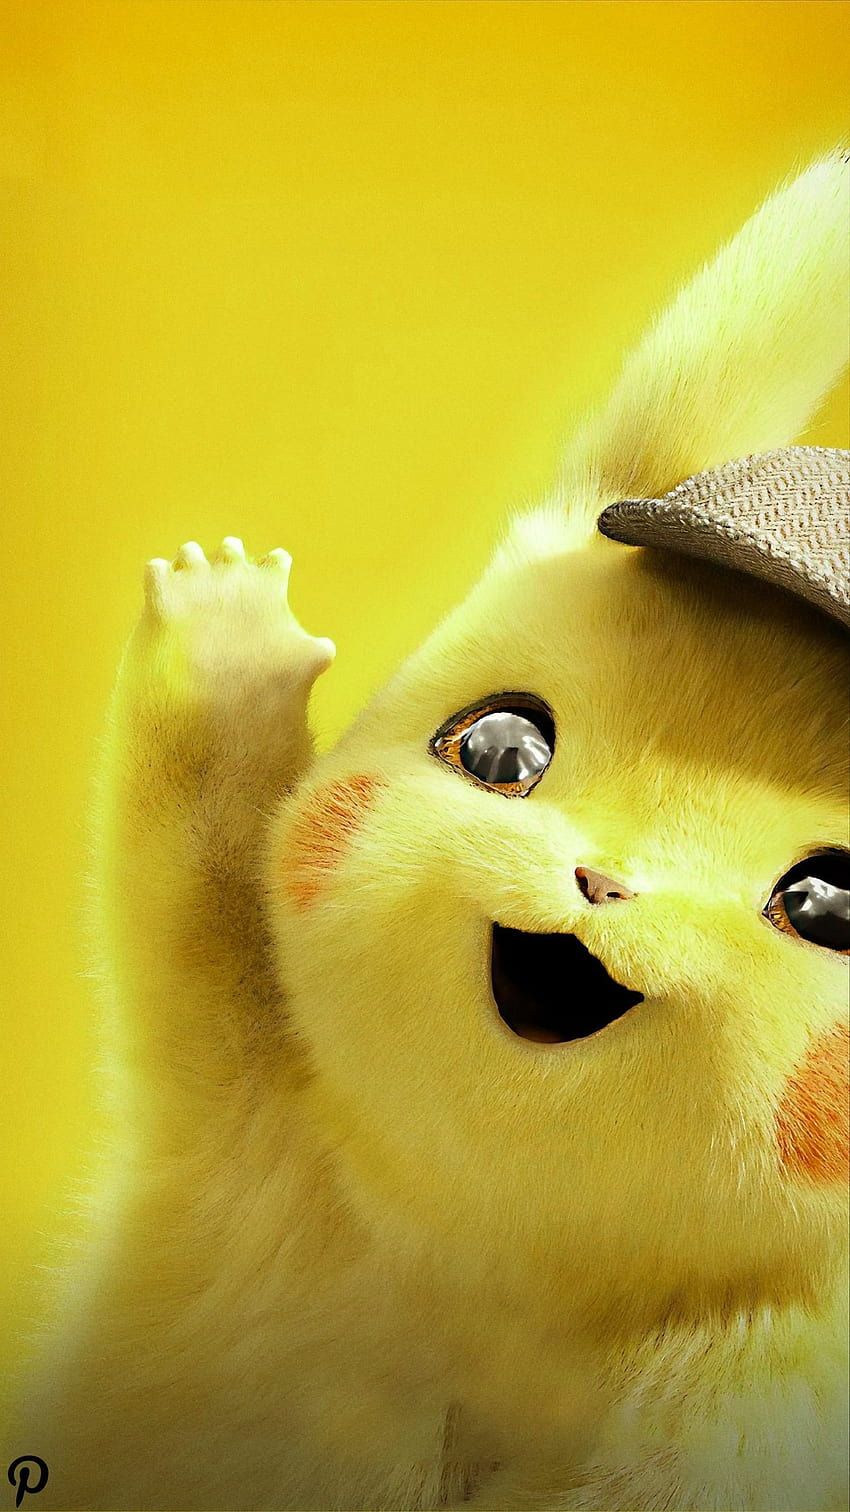 Download Pikachu wallpapers for mobile phone free Pikachu HD pictures